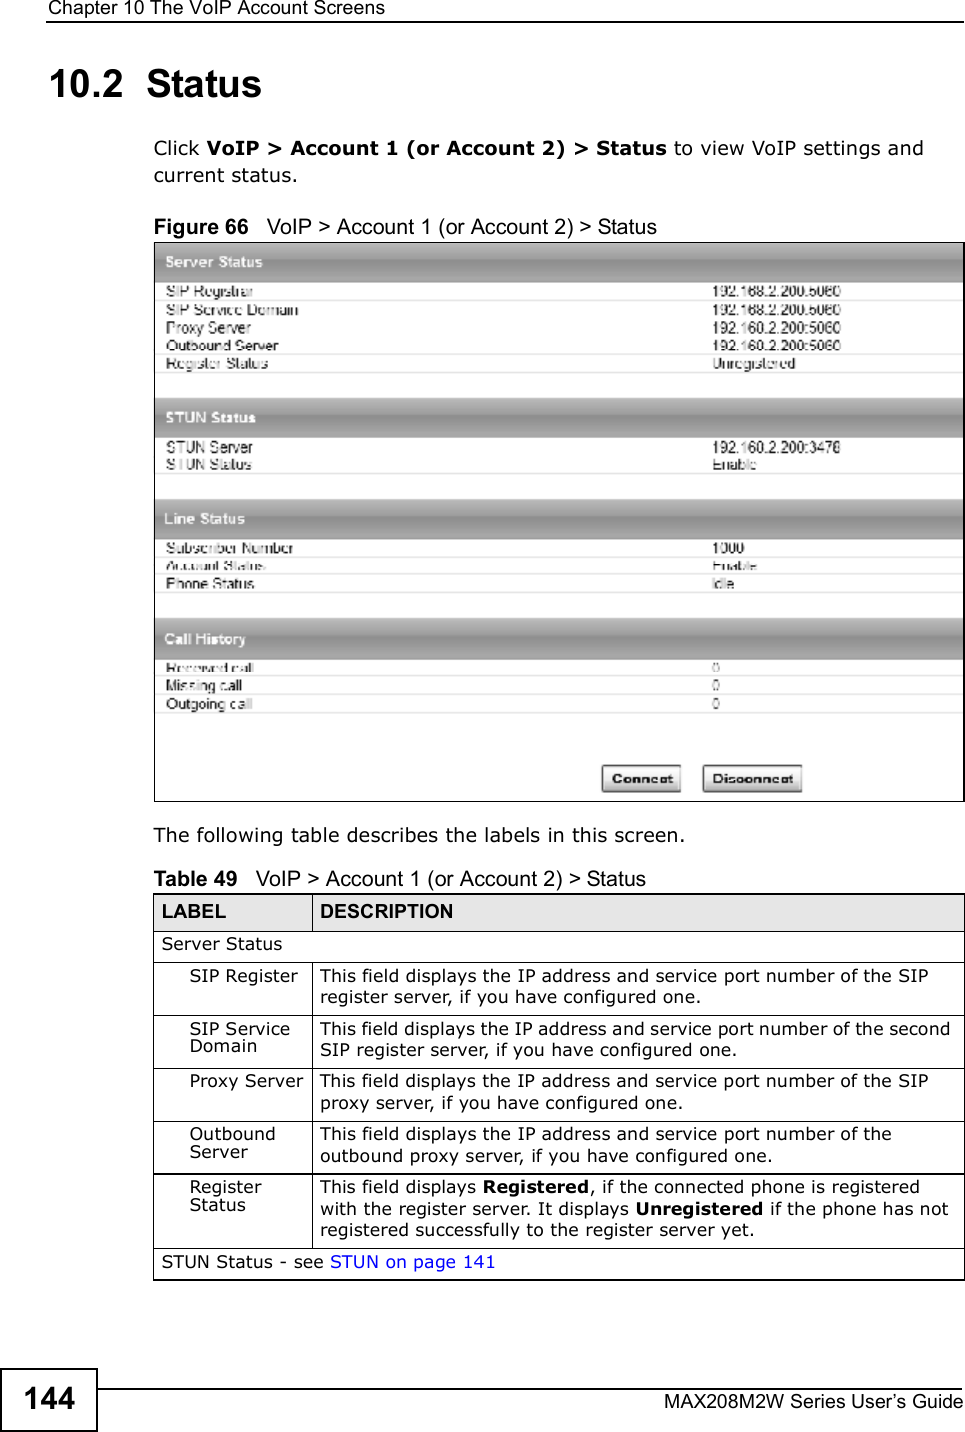 Chapter 10The VoIP Account ScreensMAX208M2W Series User s Guide14410.2  StatusClick VoIP &gt; Account 1 (or Account 2) &gt; Status to view VoIP settings and current status.Figure 66   VoIP &gt; Account 1 (or Account 2) &gt; StatusThe following table describes the labels in this screen.Table 49   VoIP &gt; Account 1 (or Account 2) &gt; StatusLABEL DESCRIPTIONServer StatusSIP Register This field displays the IP address and service port number of the SIP register server, if you have configured one.SIP Service DomainThis field displays the IP address and service port number of the second SIP register server, if you have configured one.Proxy ServerThis field displays the IP address and service port number of the SIP proxy server, if you have configured one.Outbound ServerThis field displays the IP address and service port number of the outbound proxy server, if you have configured one.Register StatusThis field displays Registered, if the connected phone is registered with the register server. It displays Unregistered if the phone has not registered successfully to the register server yet.STUN Status - see STUN on page 141